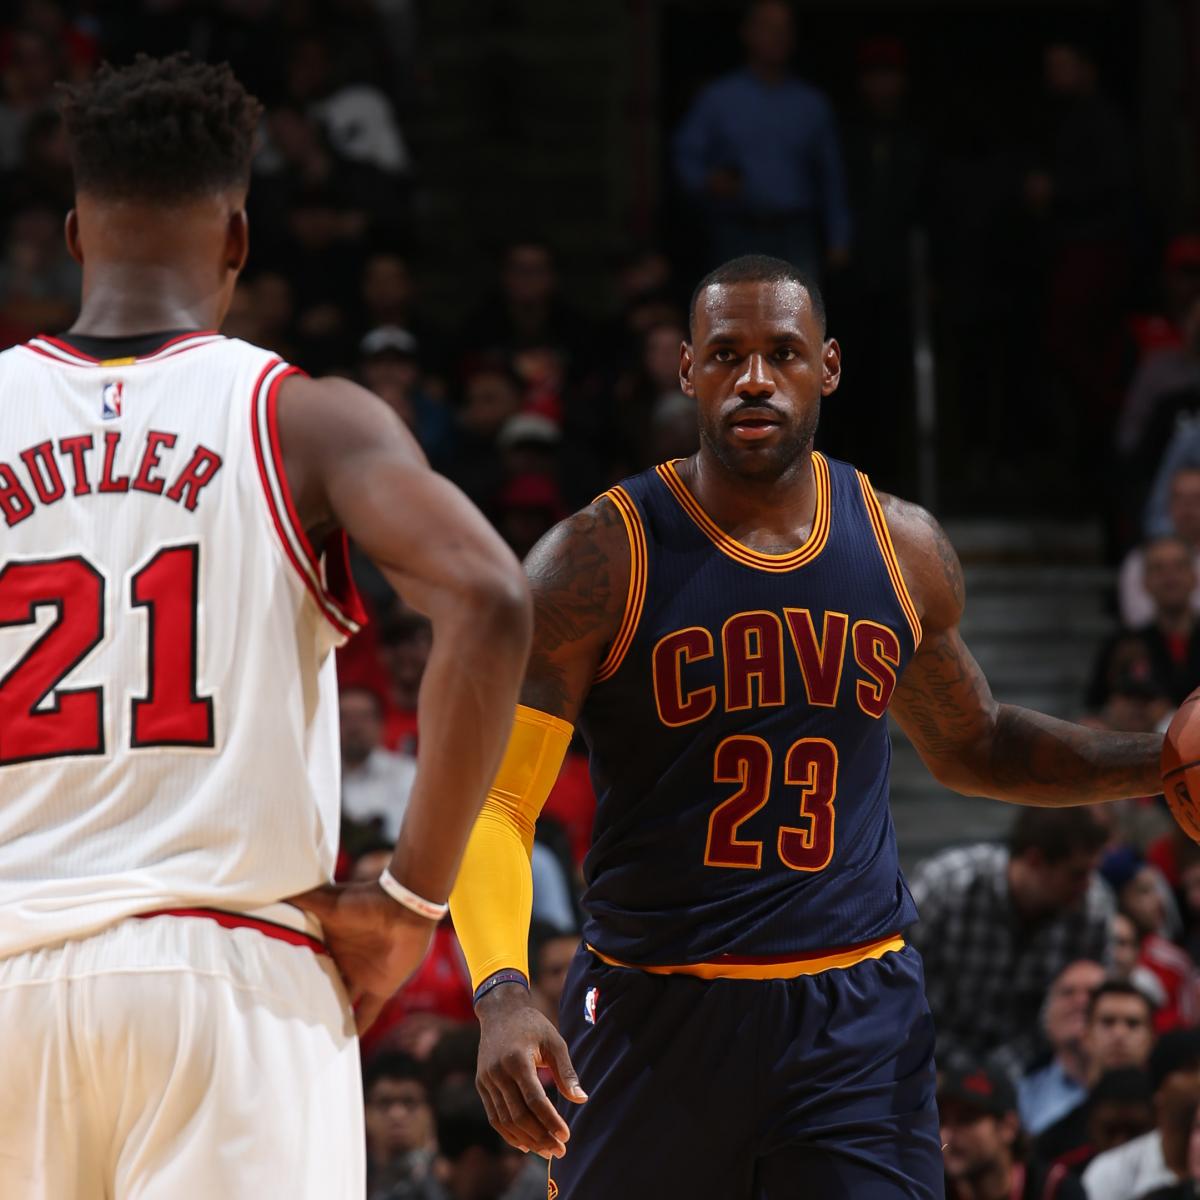 Jeff Green saves Cavs after heart surgery nearly cost him everything